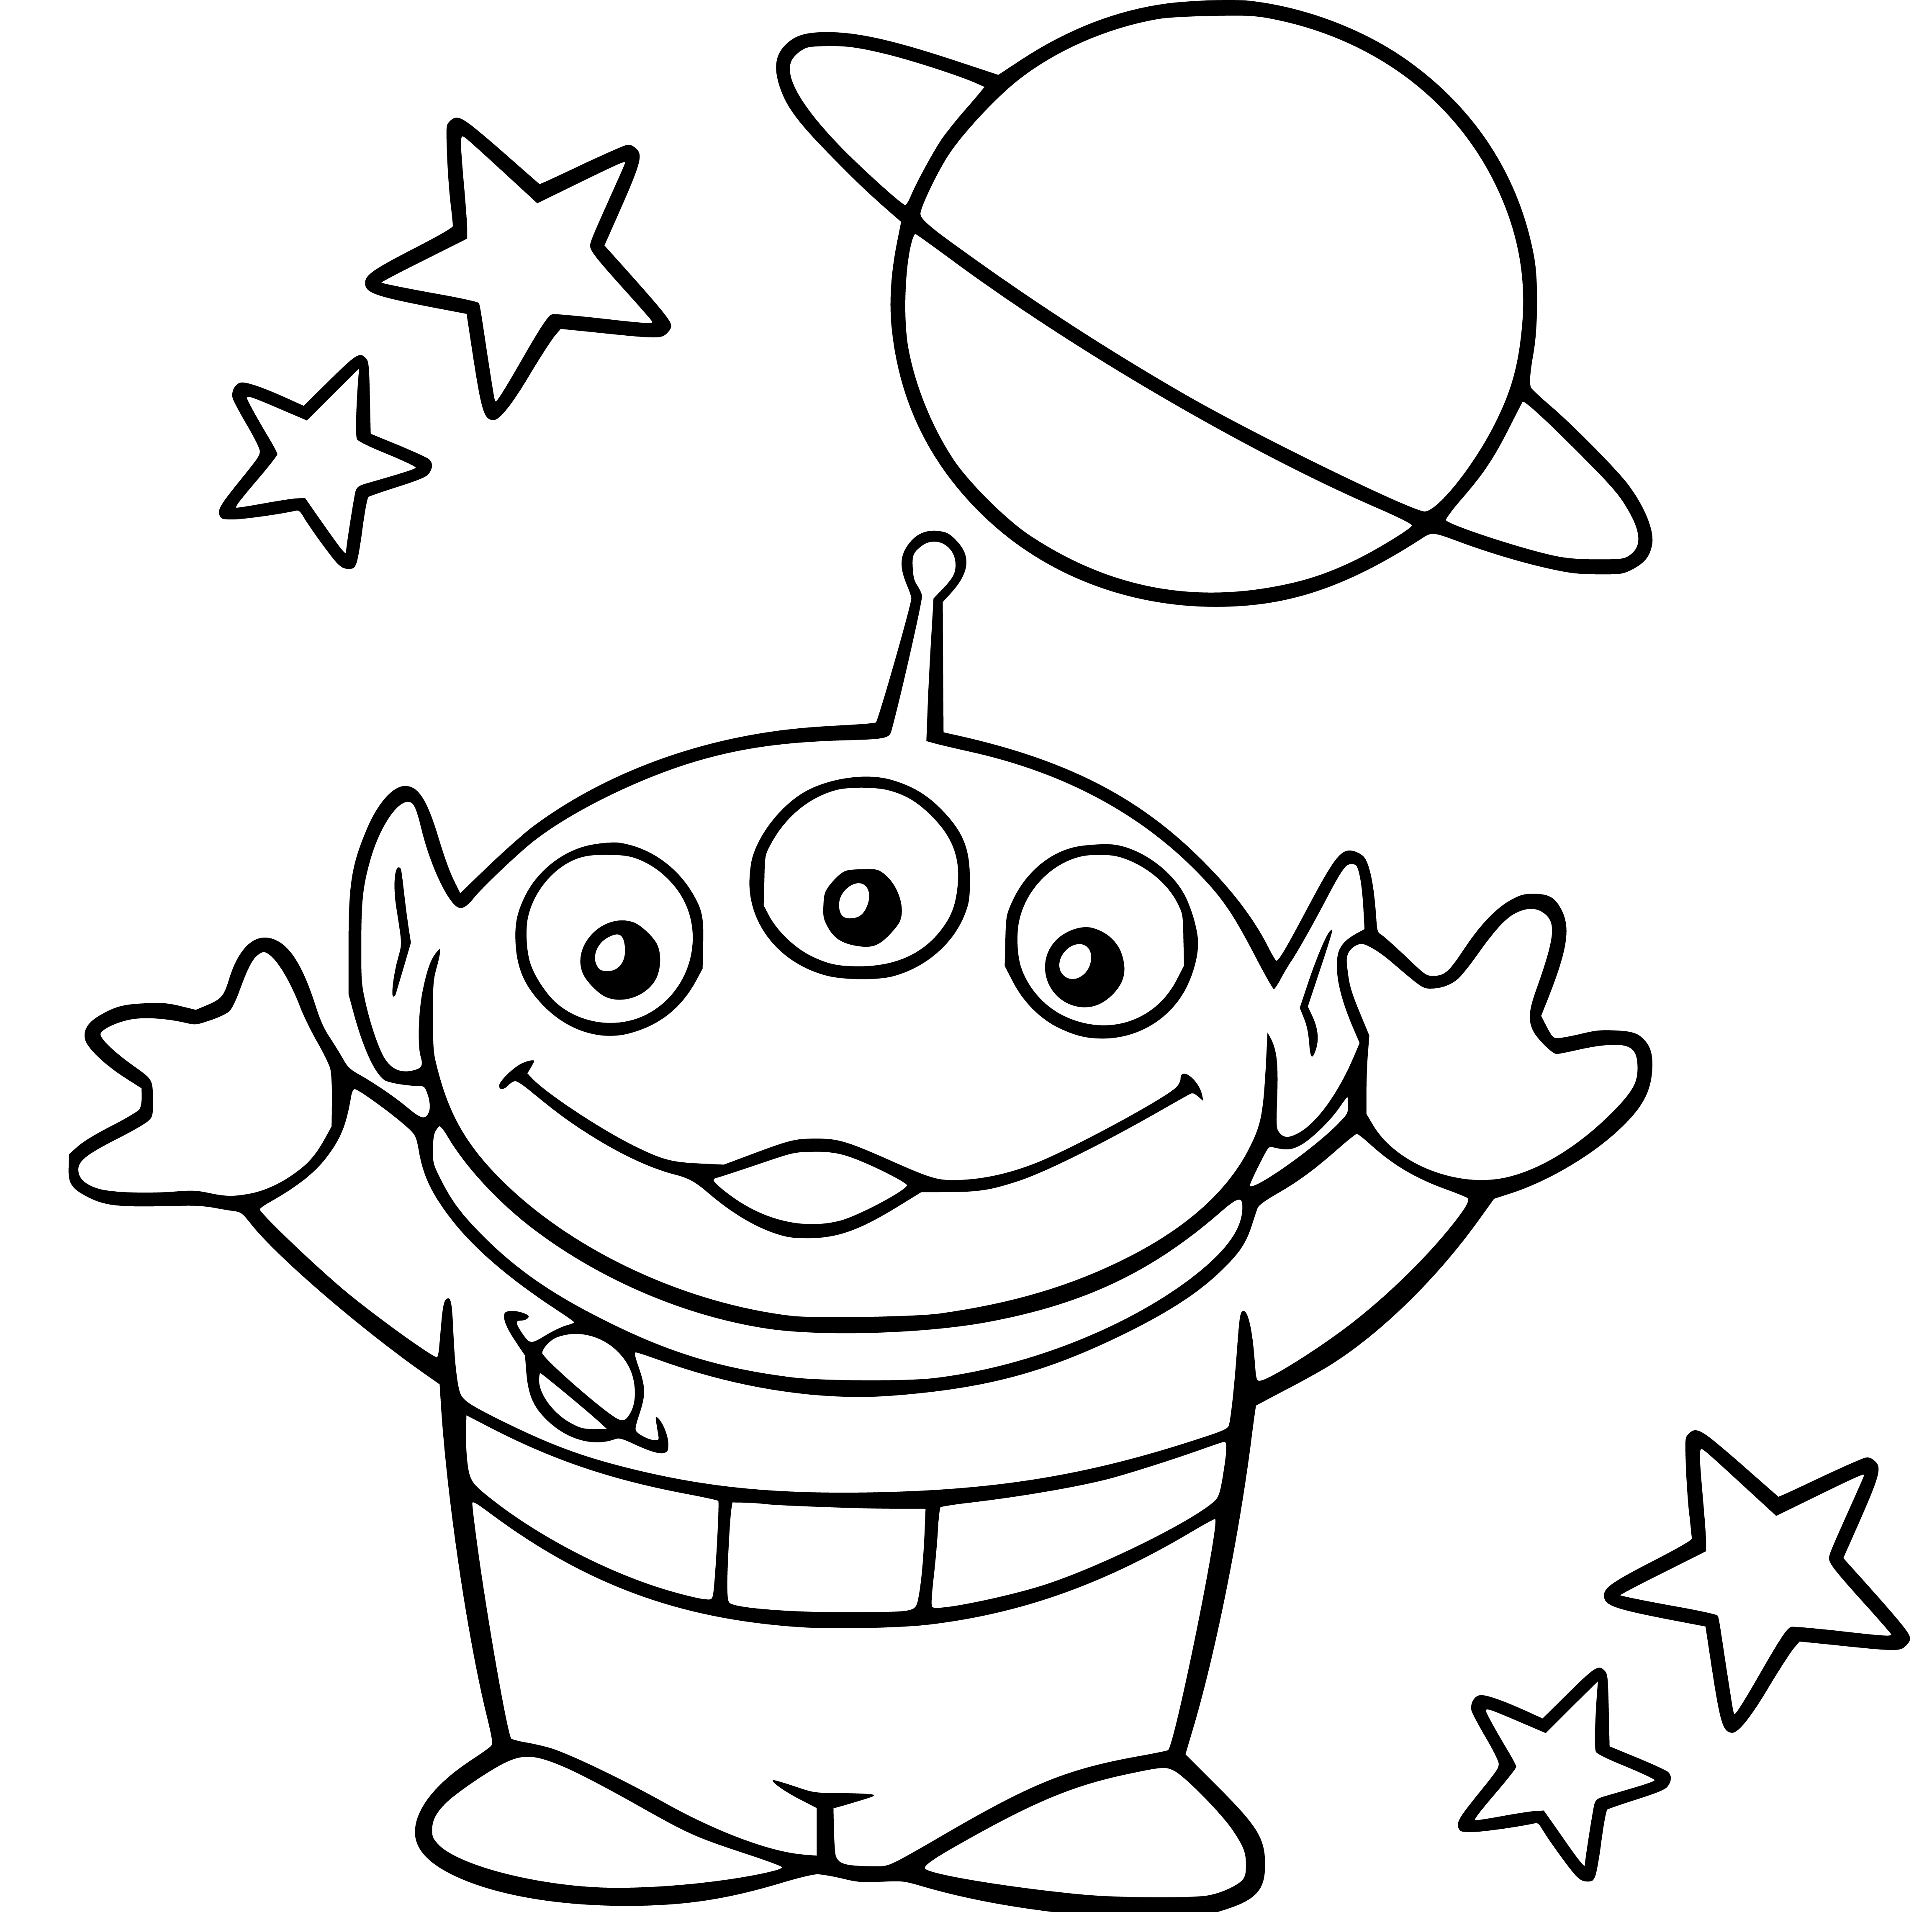 Toy Story: Aliens Stars Coloring Sheets for Kids - SheetalColor.com